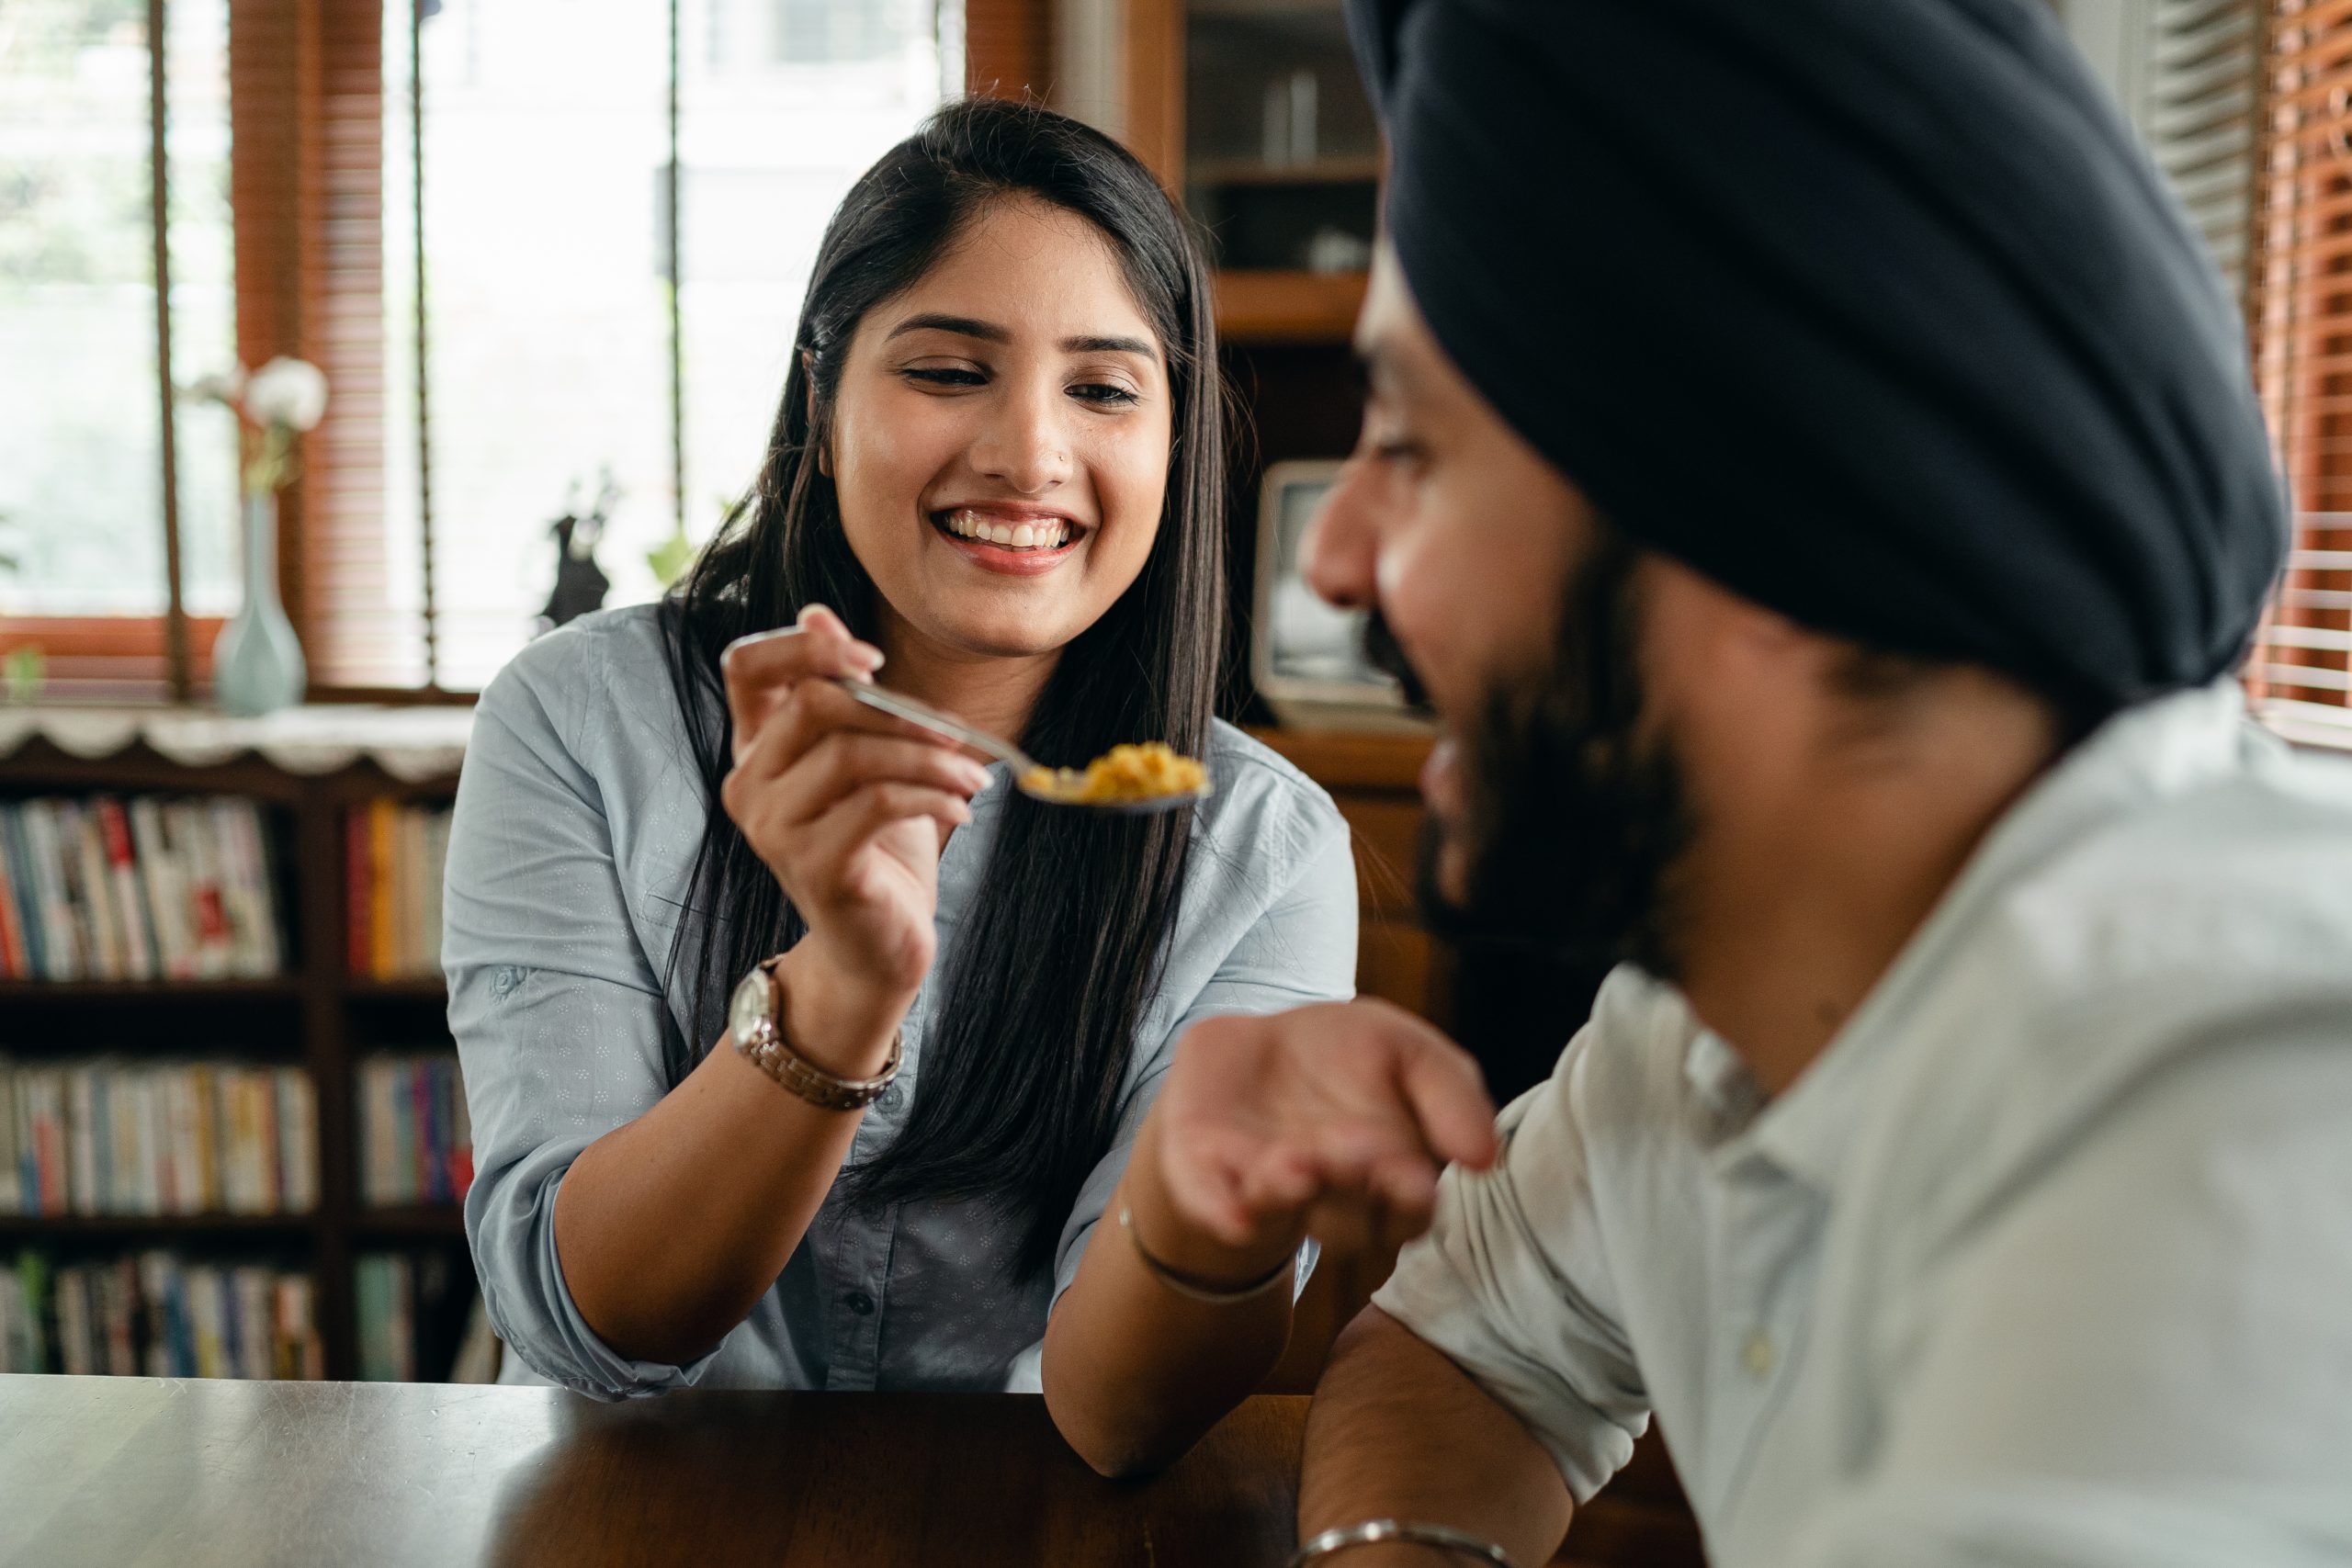 at home date ideas
couple tasting food
source: ketut-subiyanto from Pexels